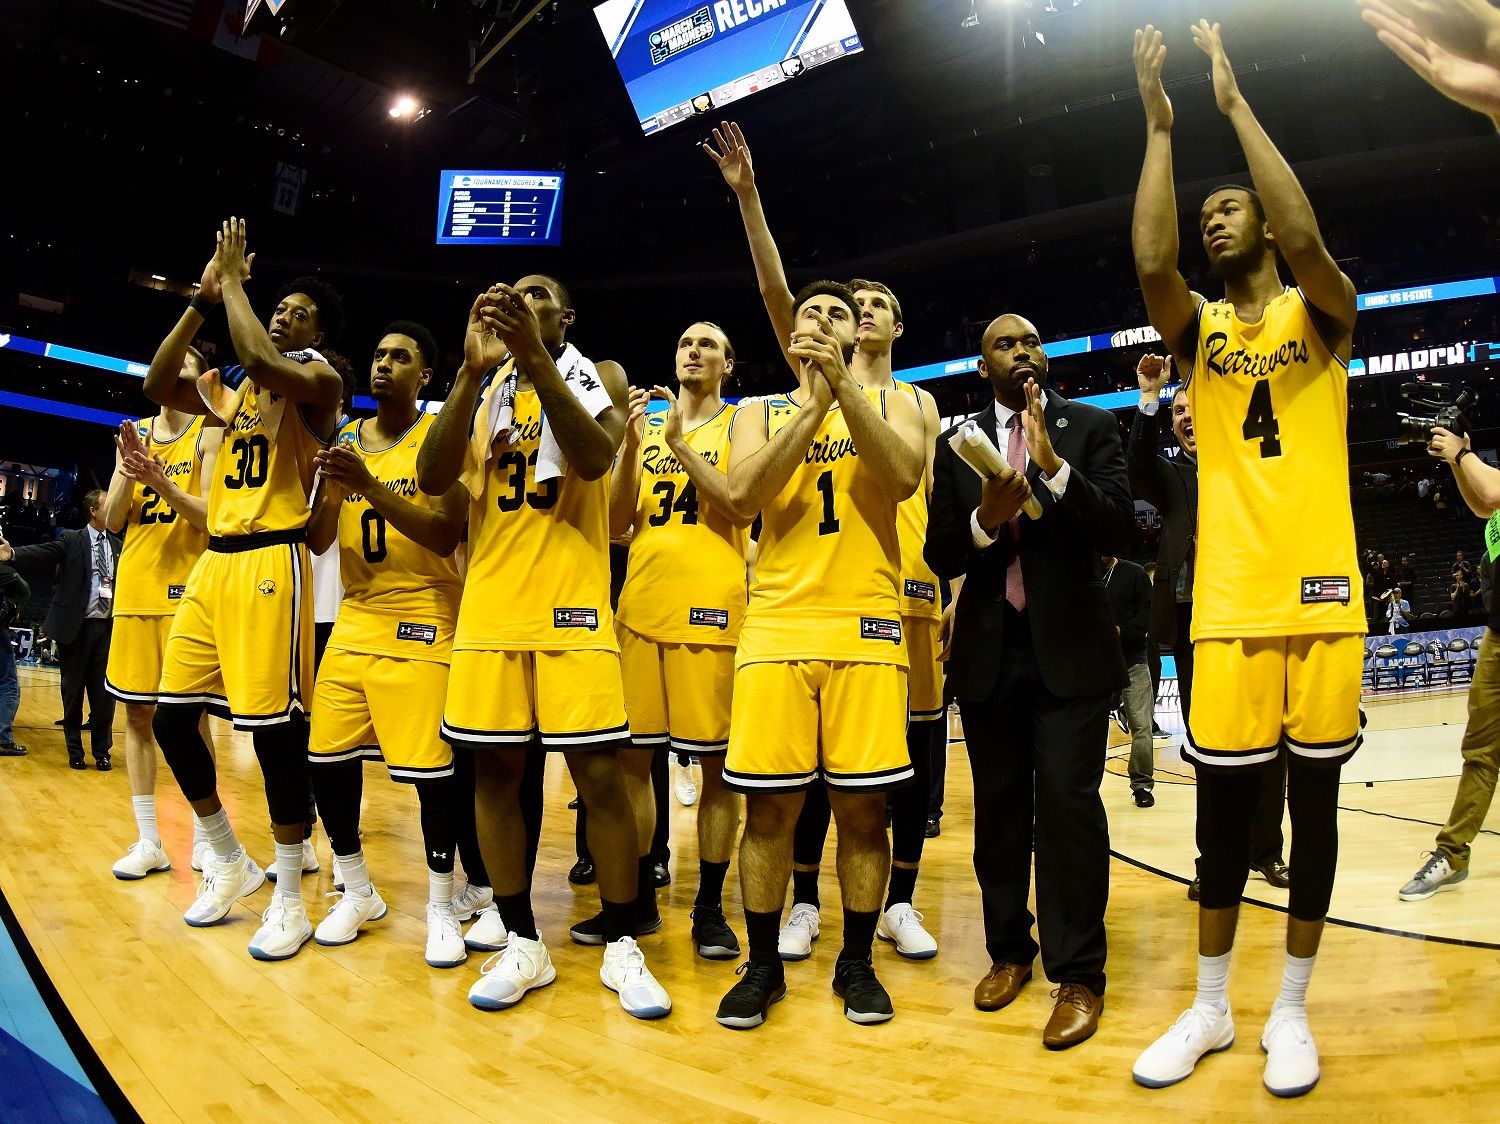 CHARLOTTE, NC - MARCH 18: The UMBC Retrievers thank their fans after losing 50-43 to the Kansas State Wildcats during the second round of the 2018 NCAA Men's Basketball Tournament at Spectrum Center on March 18, 2018 in Charlotte, North Carolina.  (Photo by Jared C. Tilton/Getty Images)